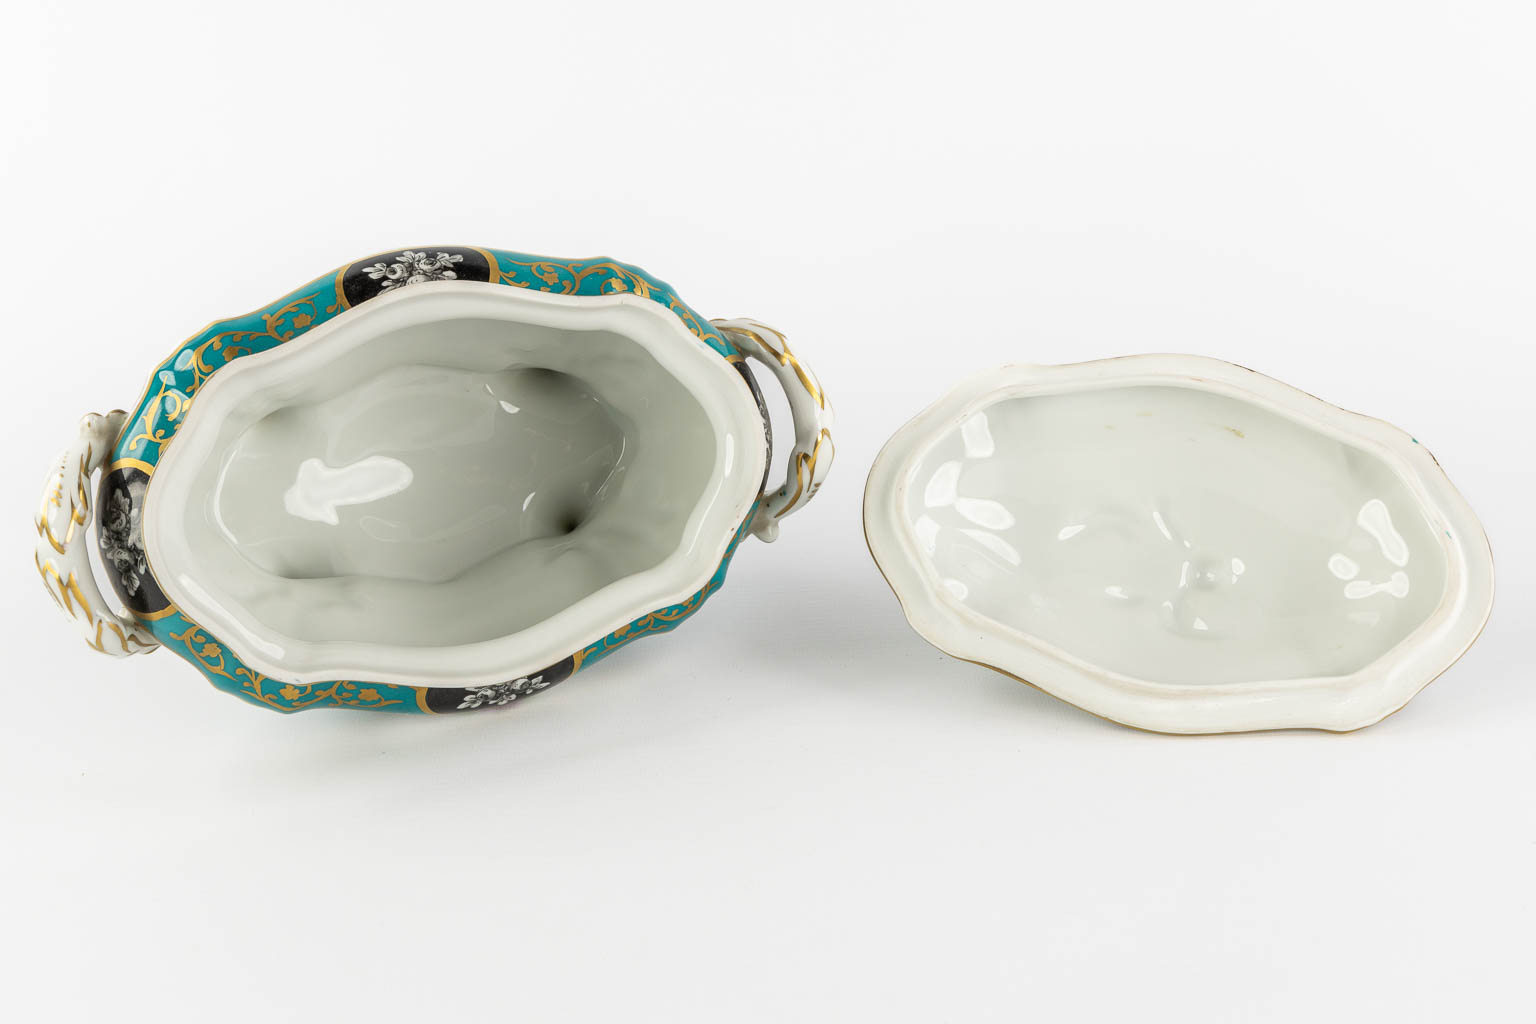 Pillivuyt, Paris, a tureen on a plate and an oval bowl. 20th C. (L:23 x W:36 x H:20 cm) - Image 18 of 21